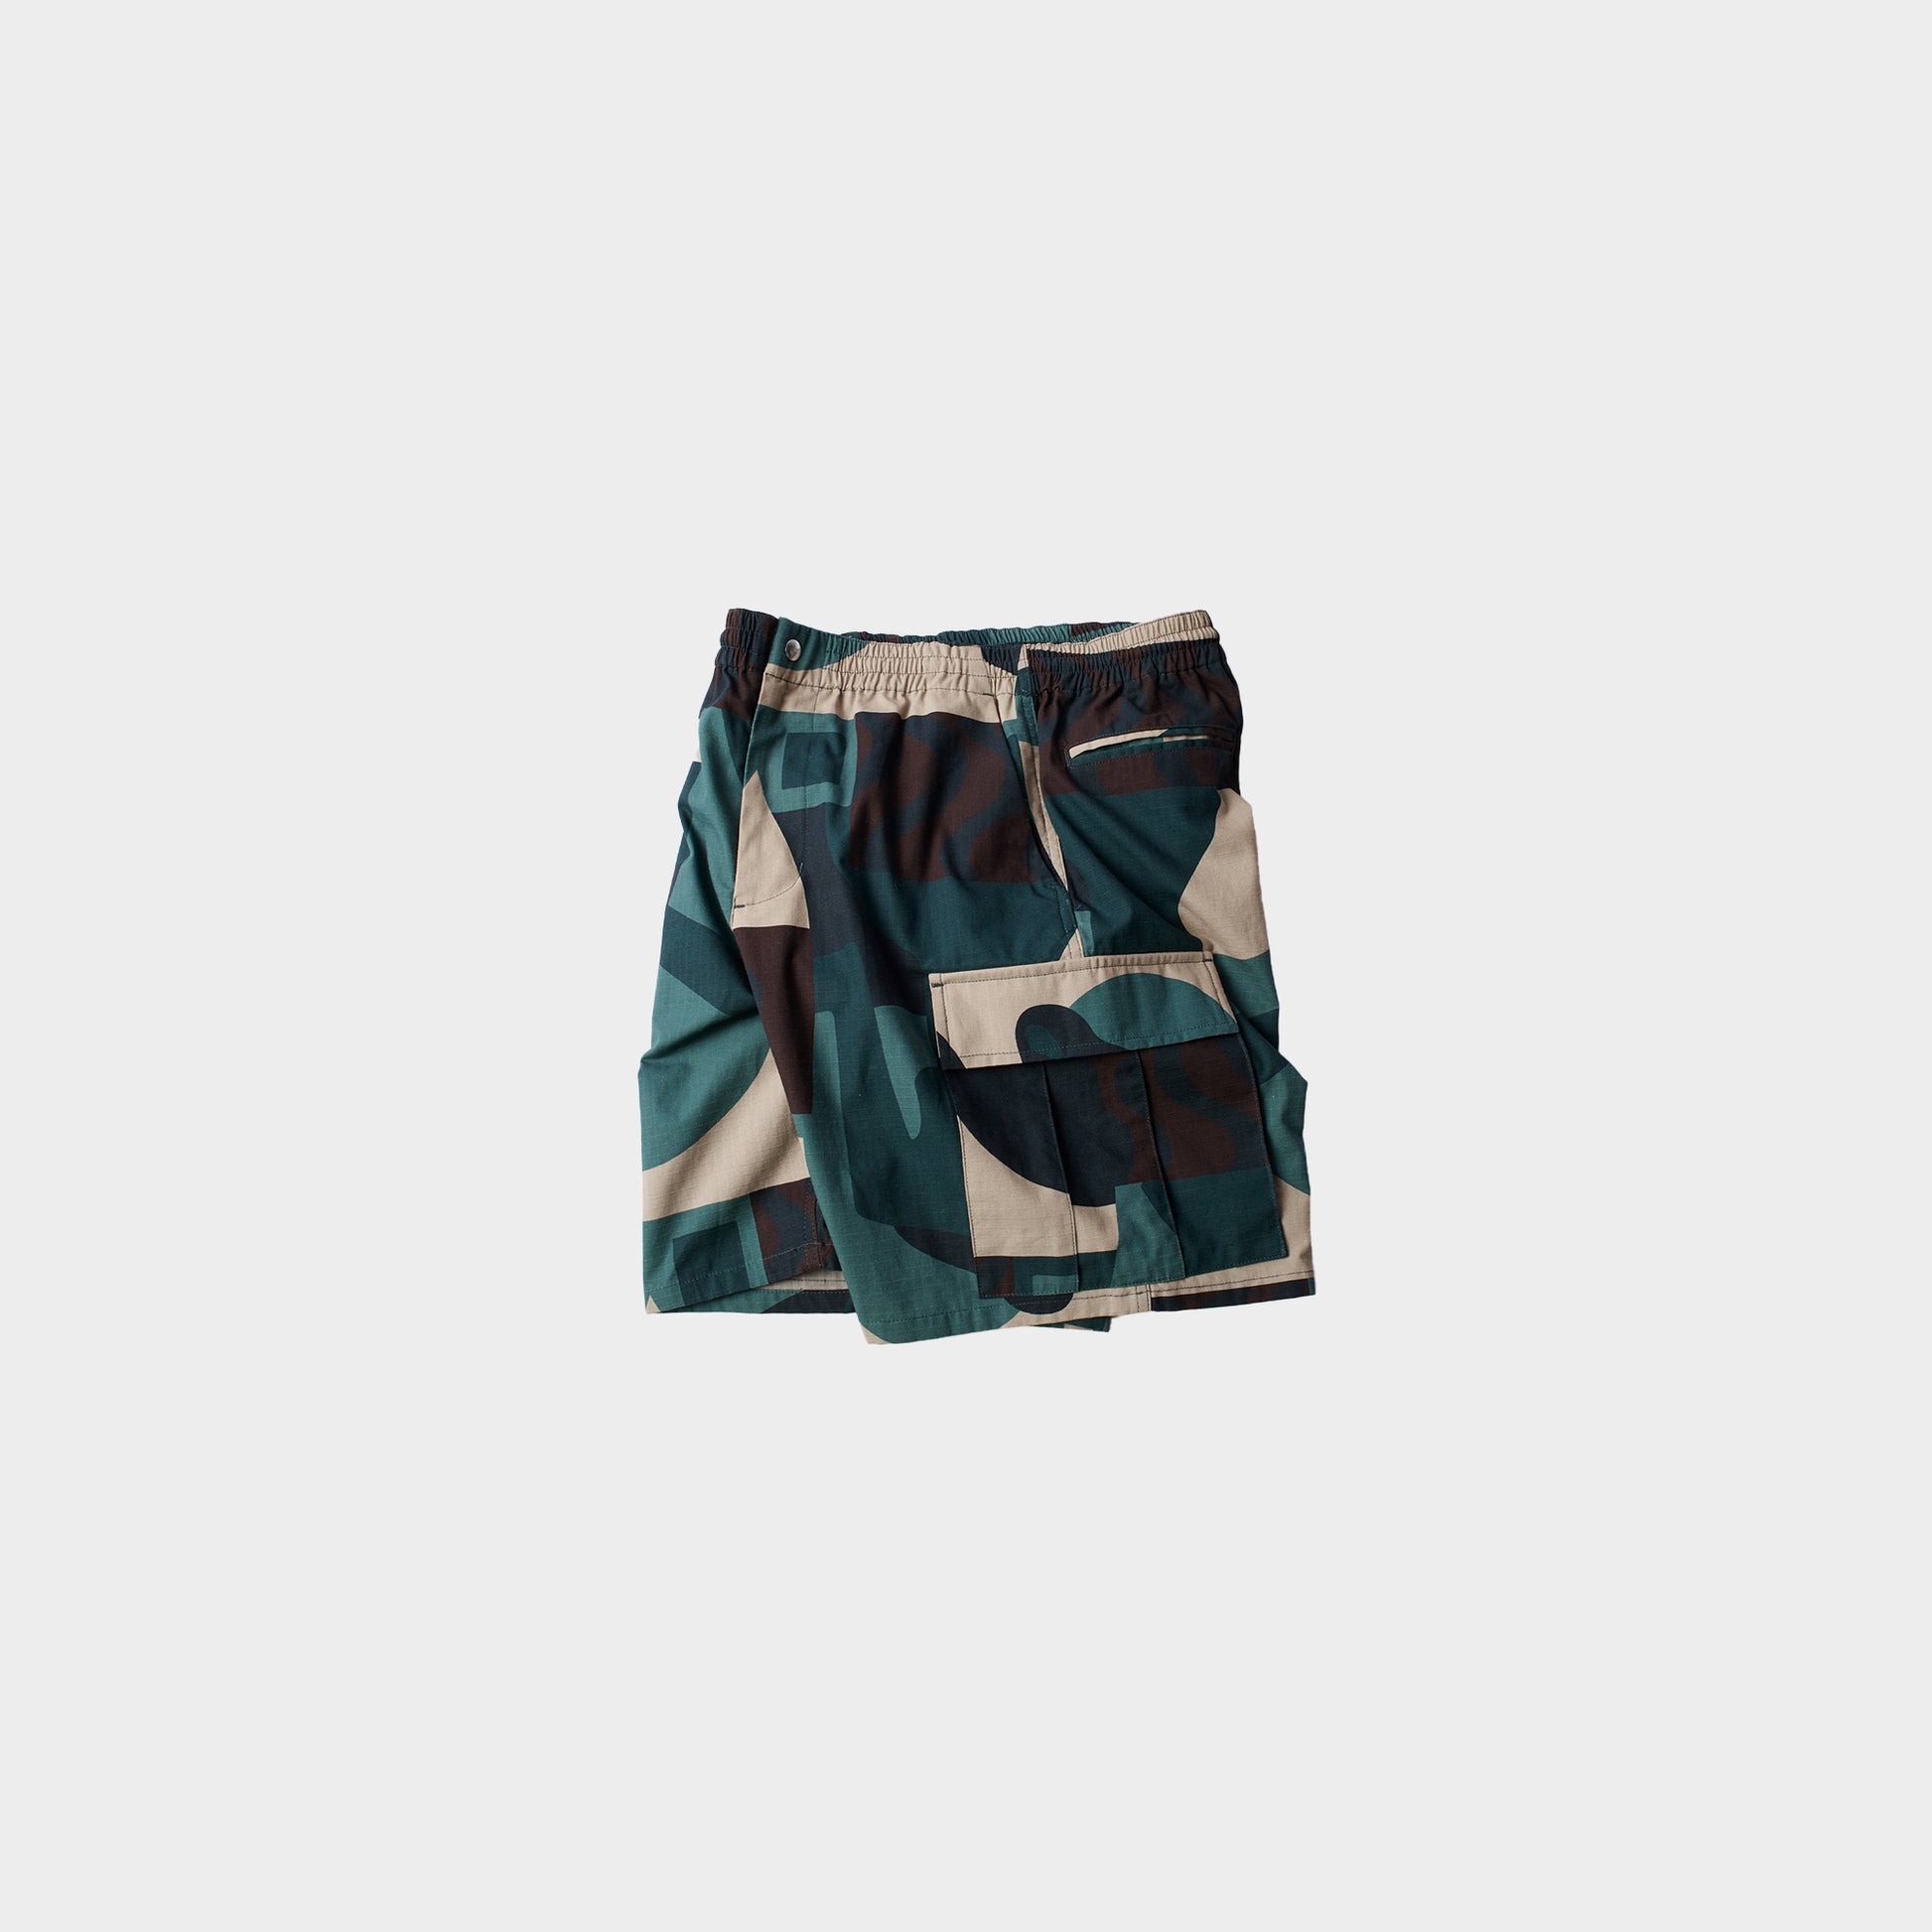 byParra Distorted Camo Shorts in der Farbe green